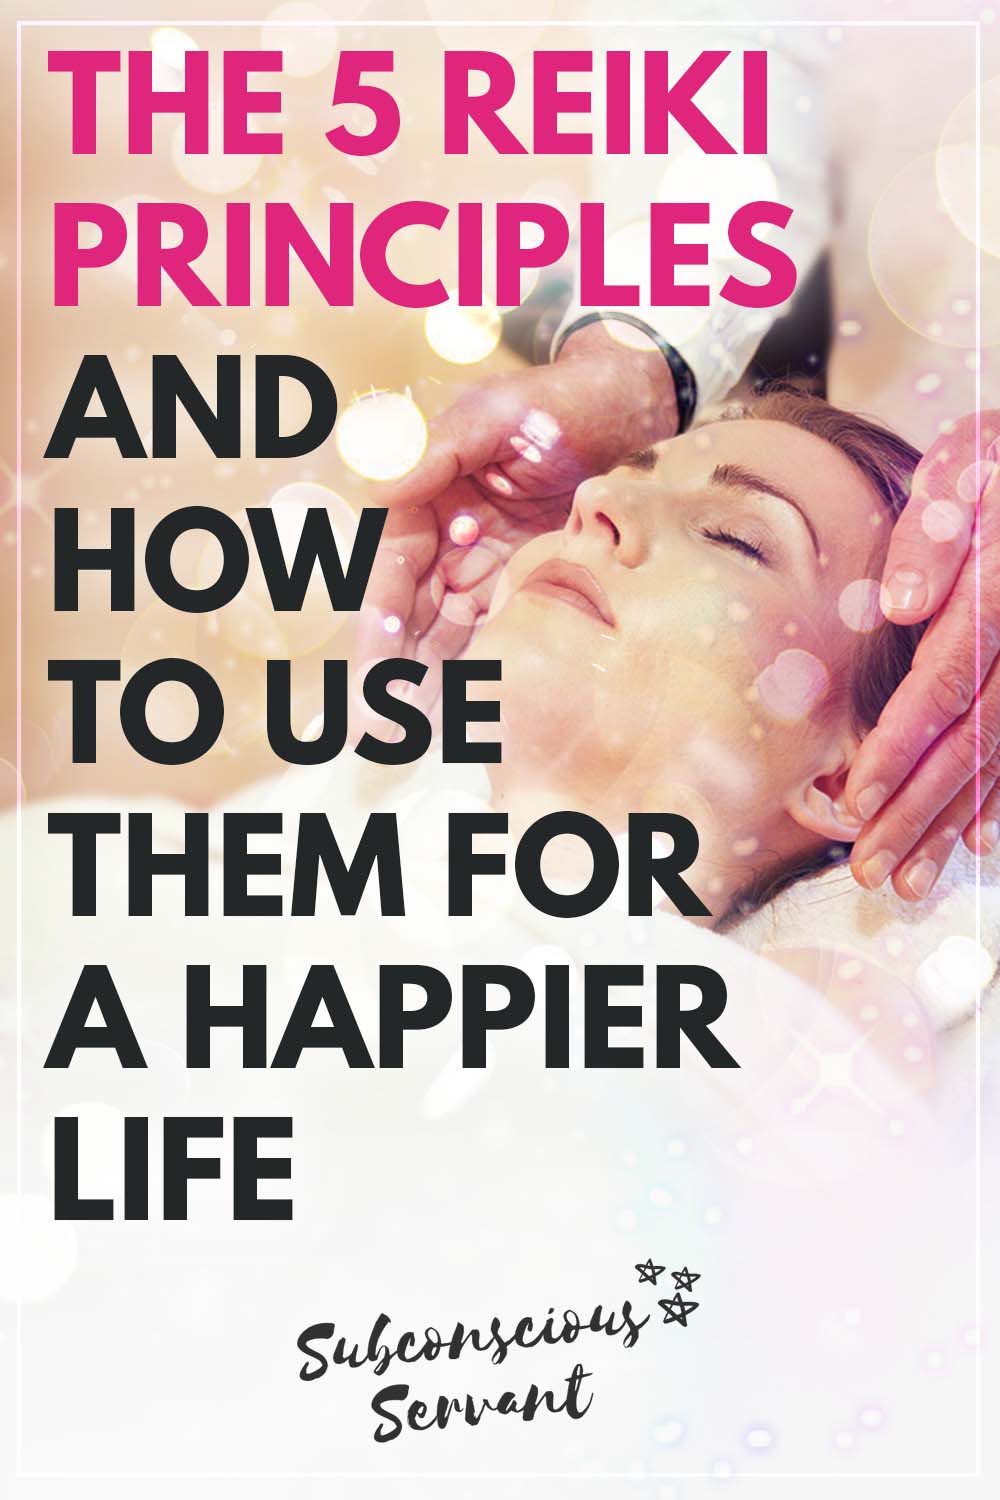 The 5 Reiki Principles & How To Use Them For A Happier Life